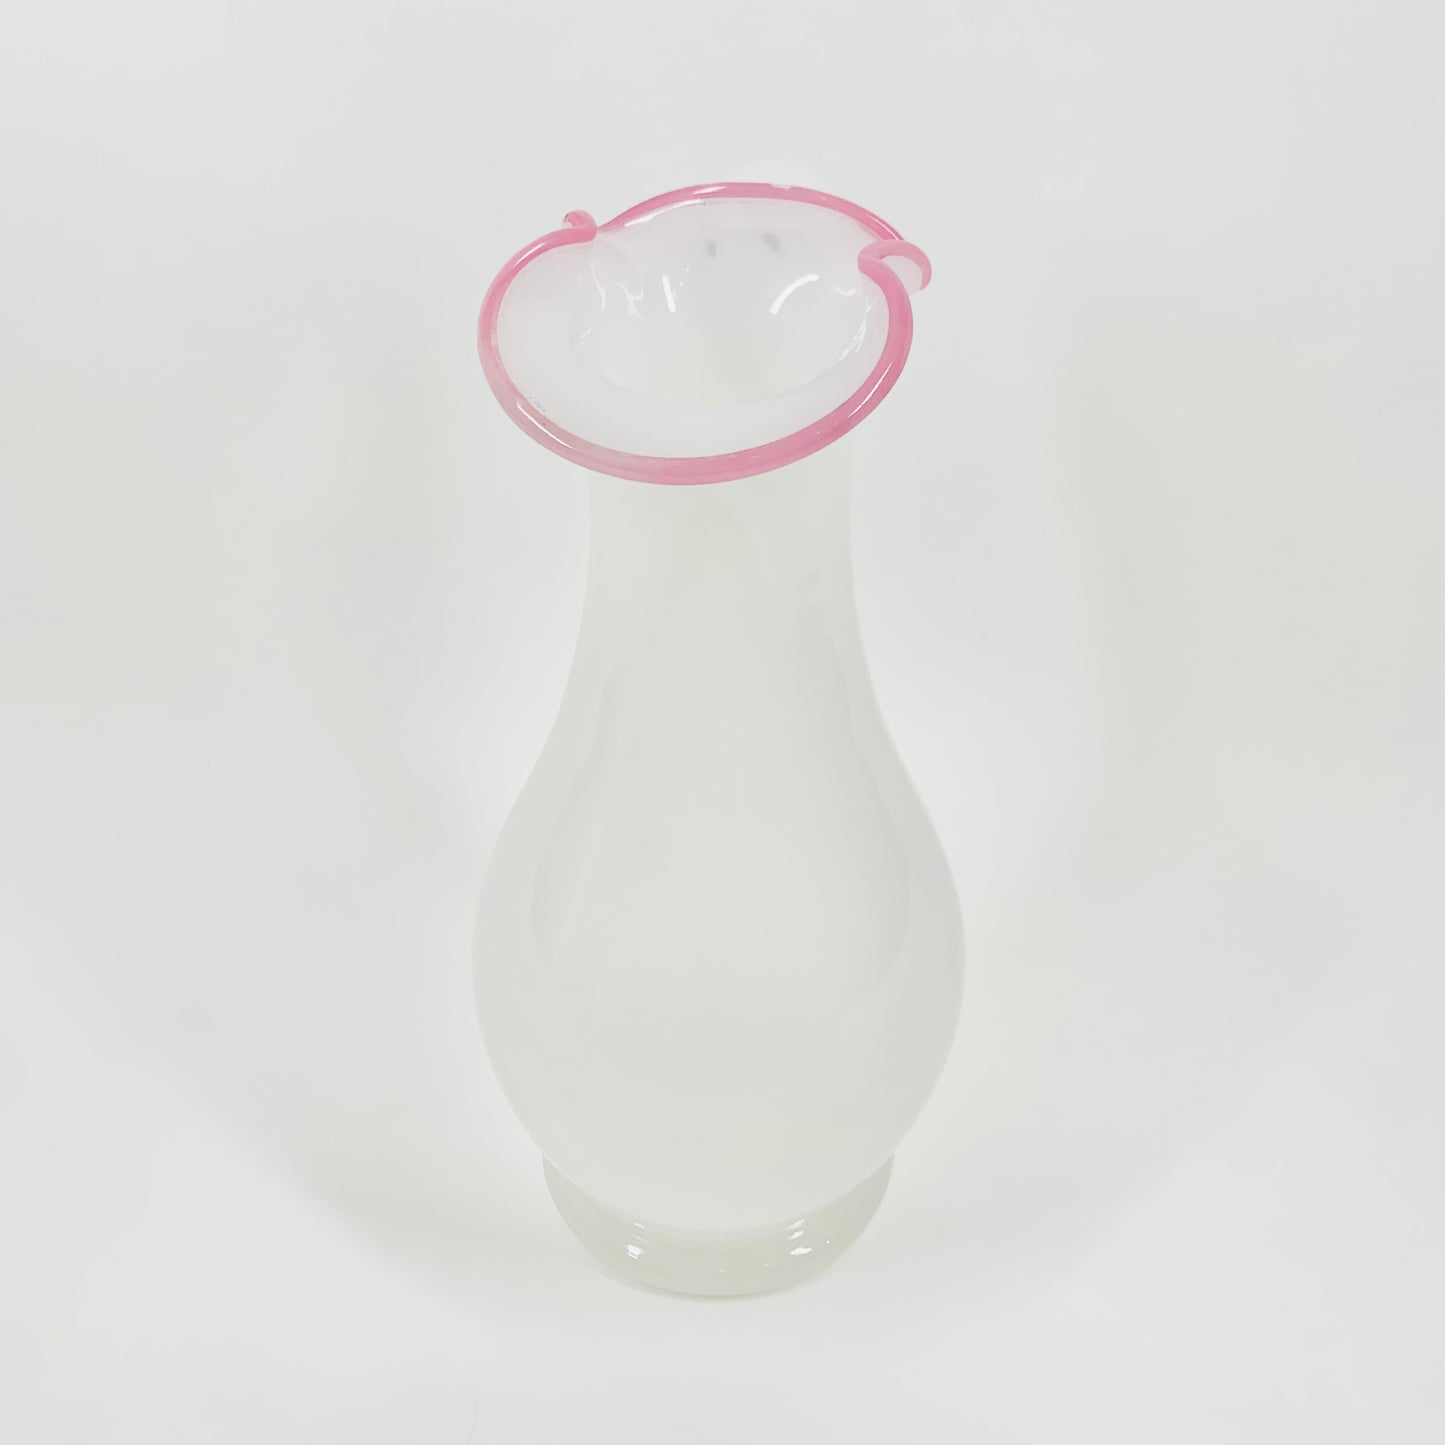 Extremely rare antique French opaline glass jug with pink rim